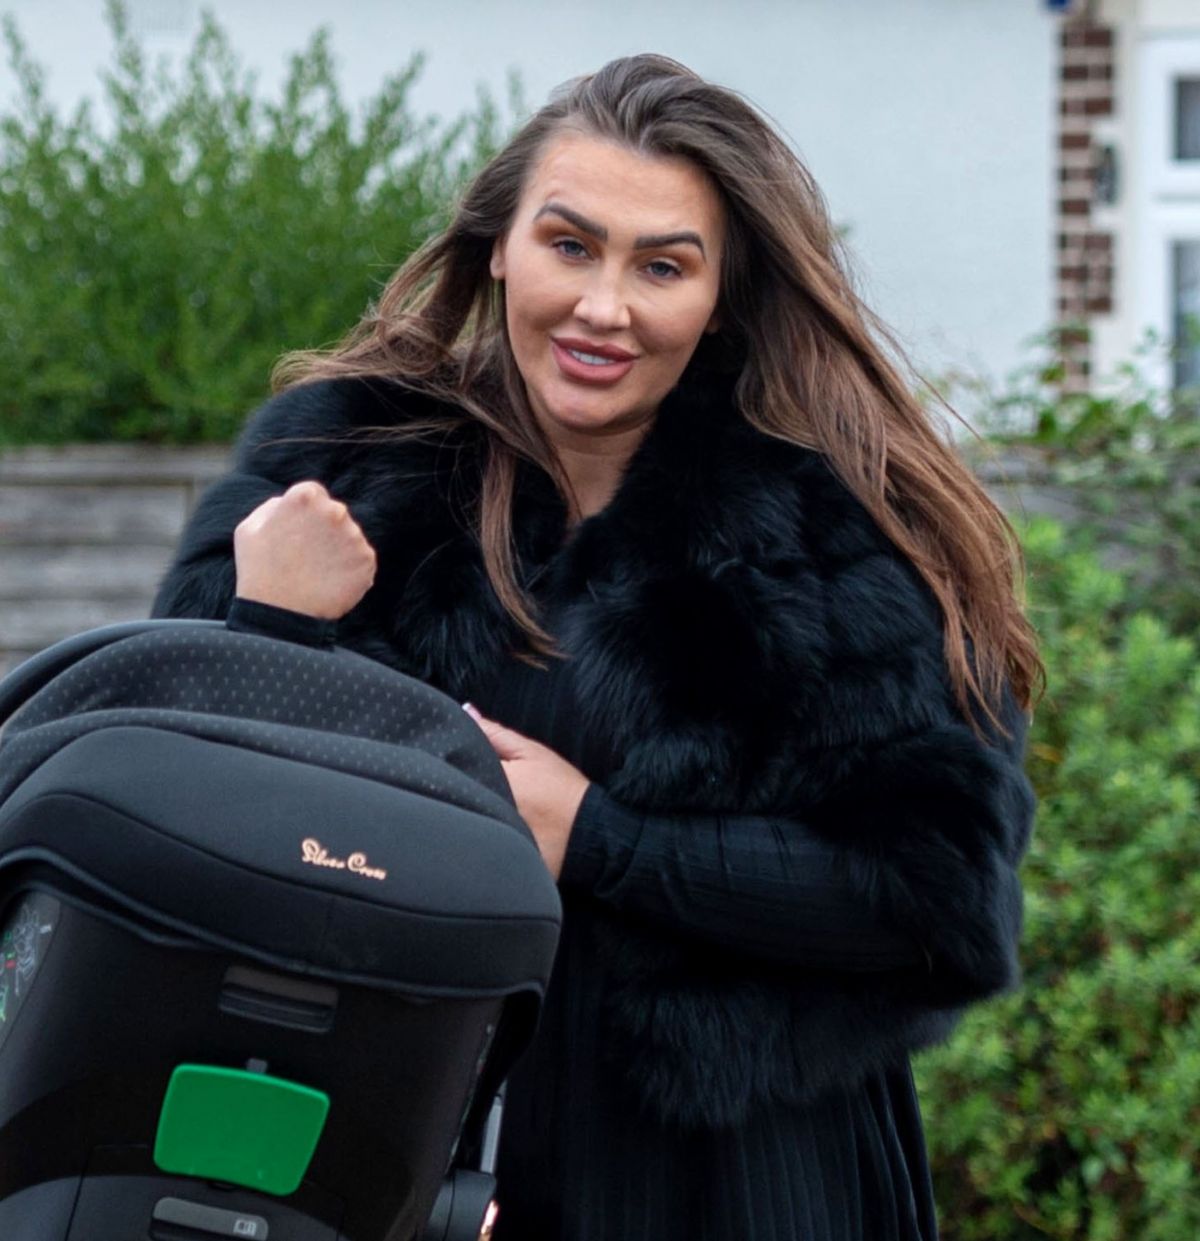 Lauren Goodger Out With Her Baby Essex